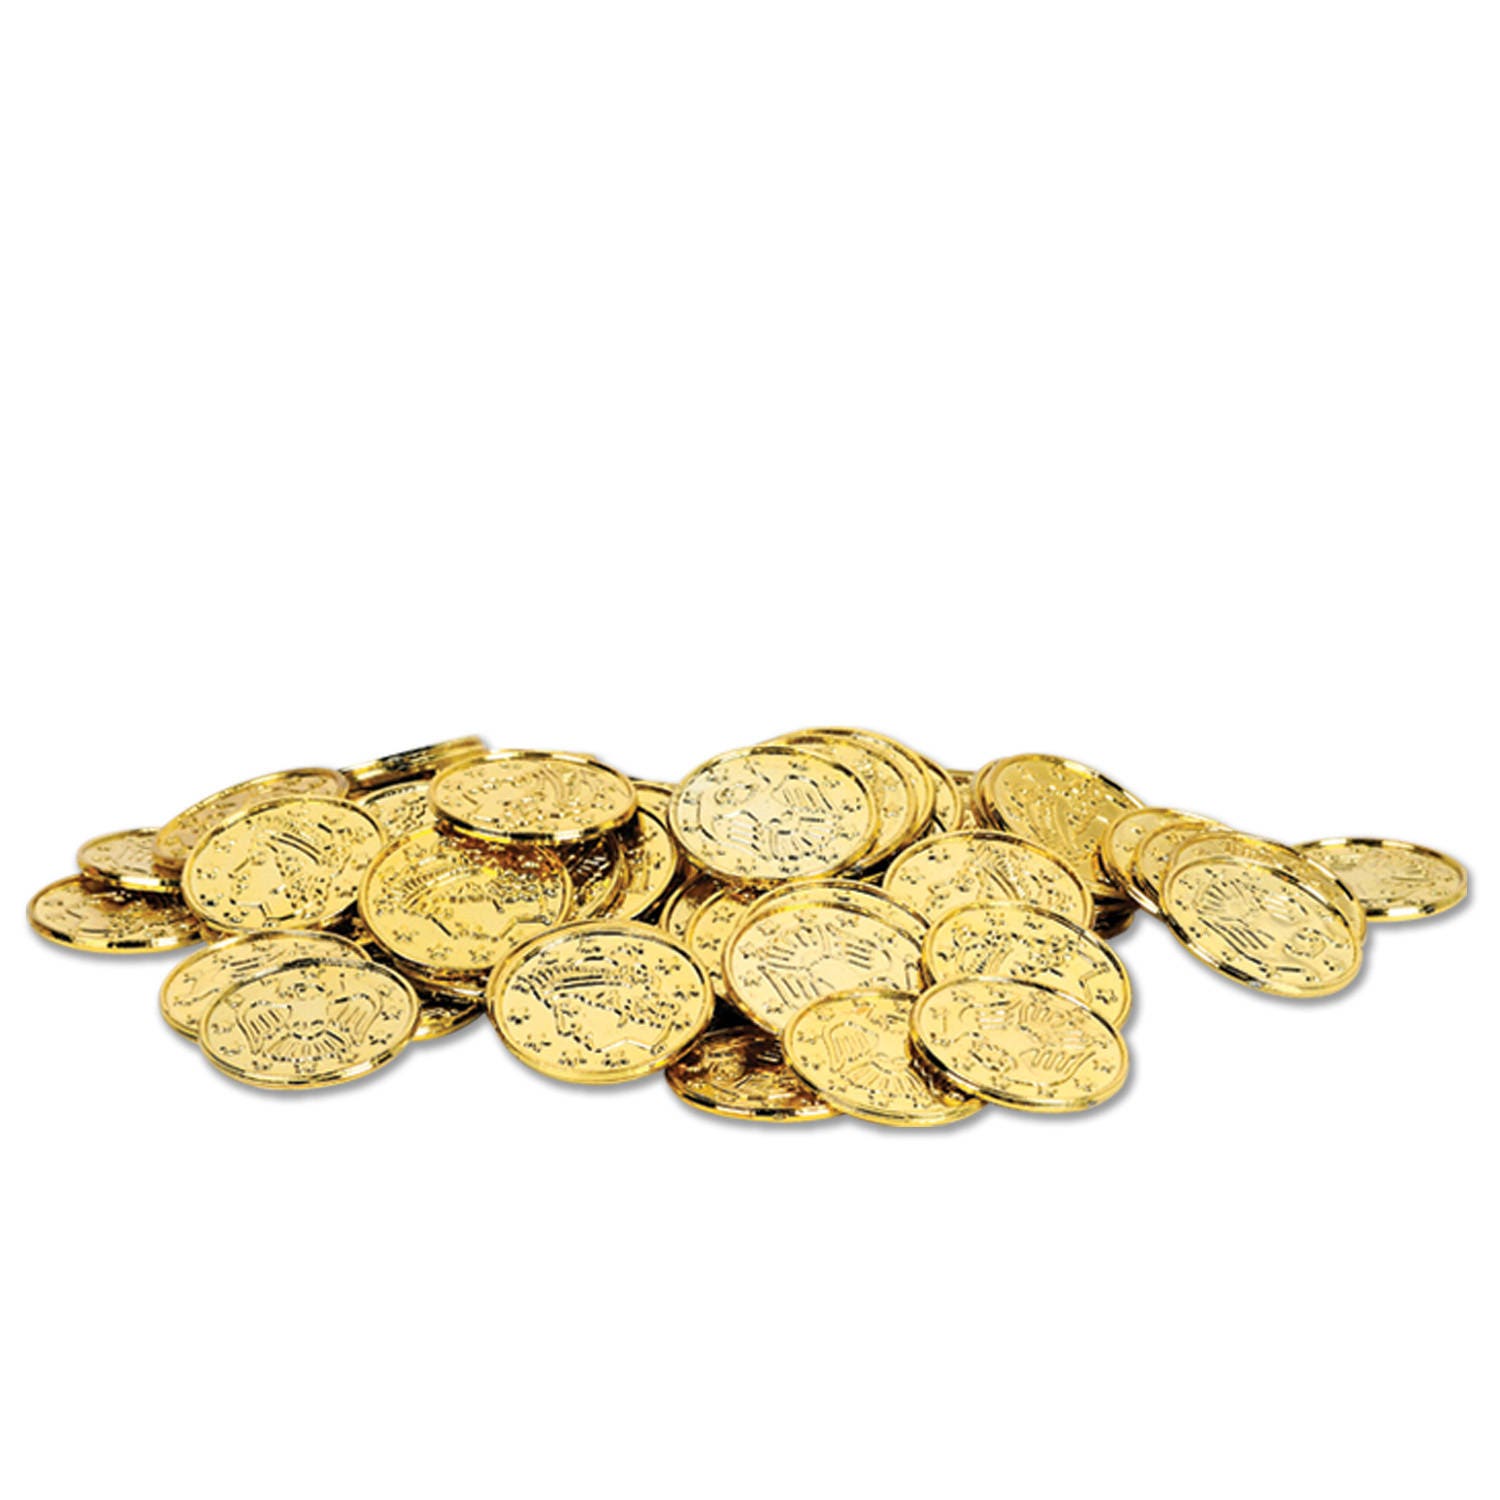 Free Shipping Pirate Coins Lot of 100 Gold Silver Doubloon Replicas PirateC.. 